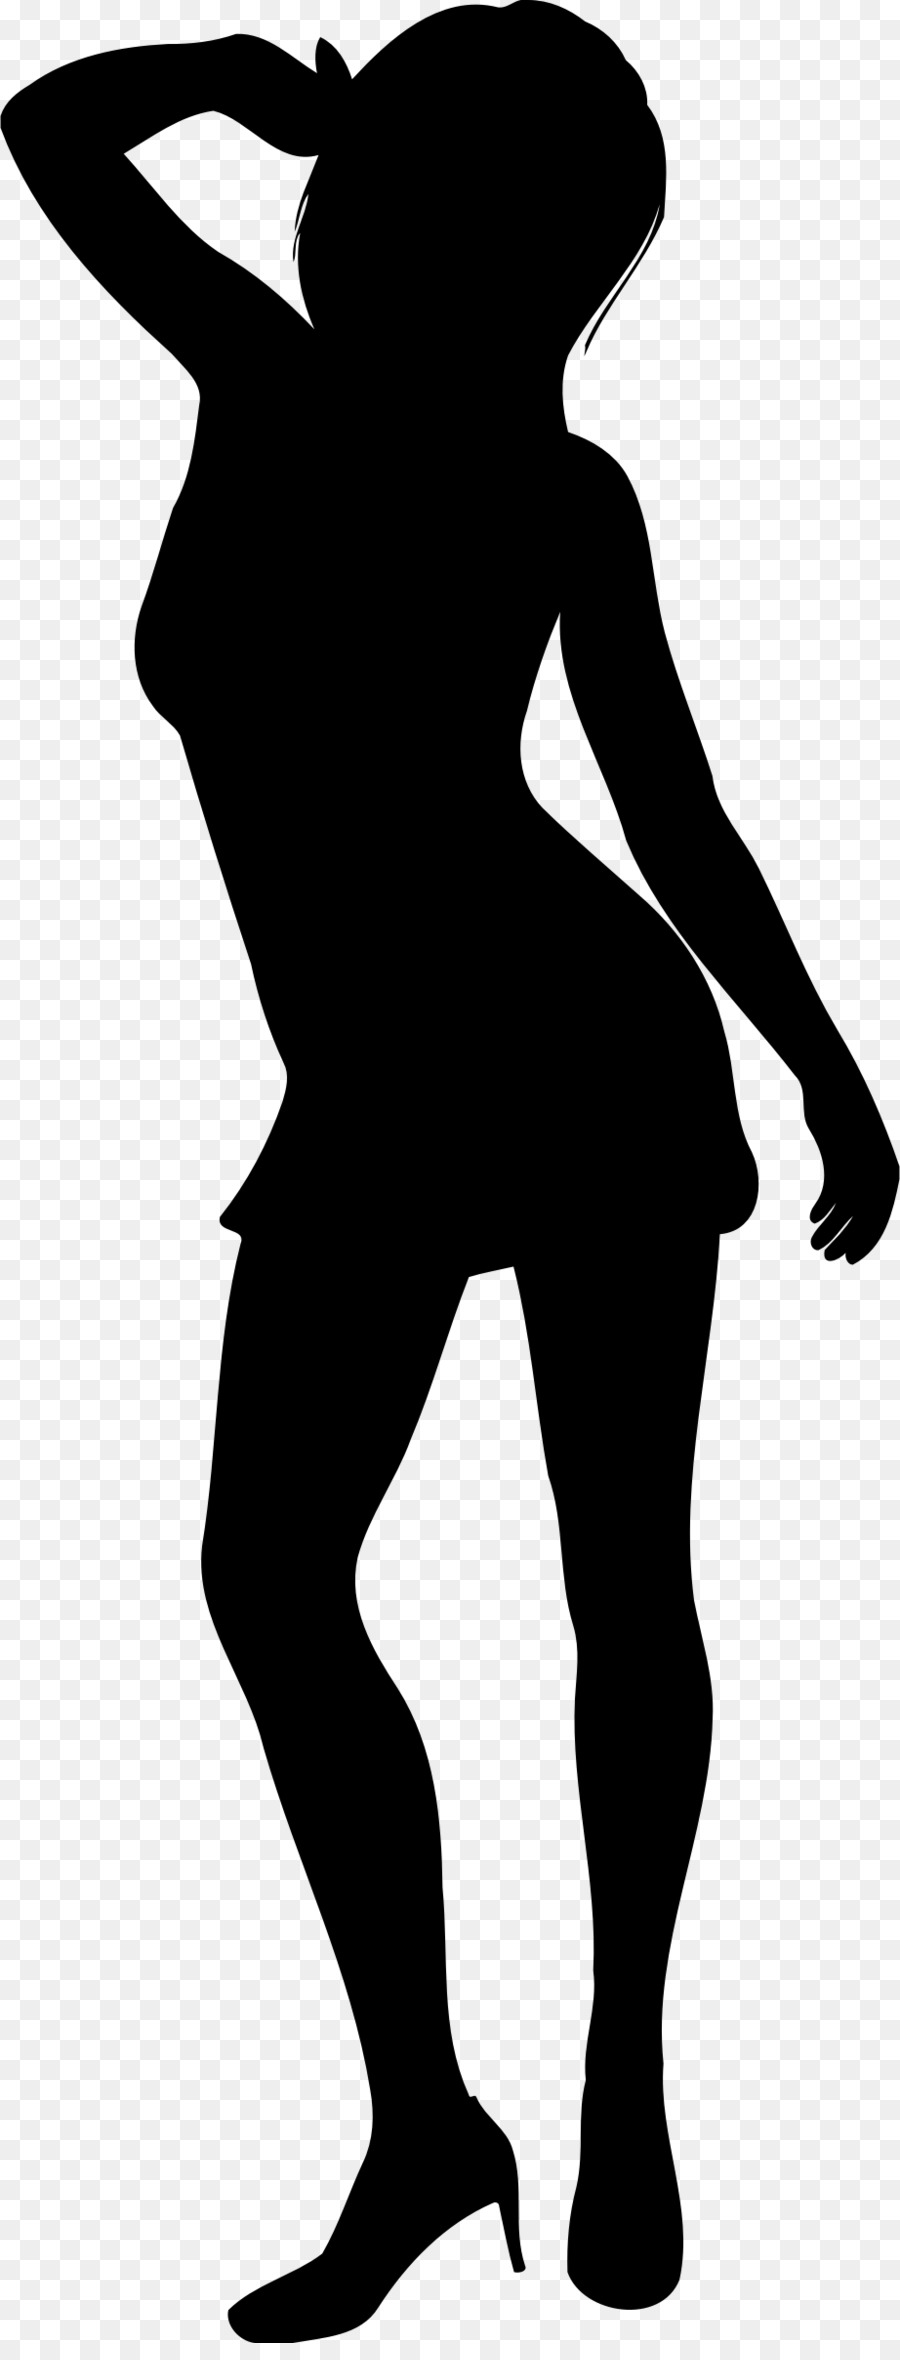 Silhouette Woman Model Clip art - illustration fashion woman png download - 922*2400 - Free Transparent Silhouette png Download.